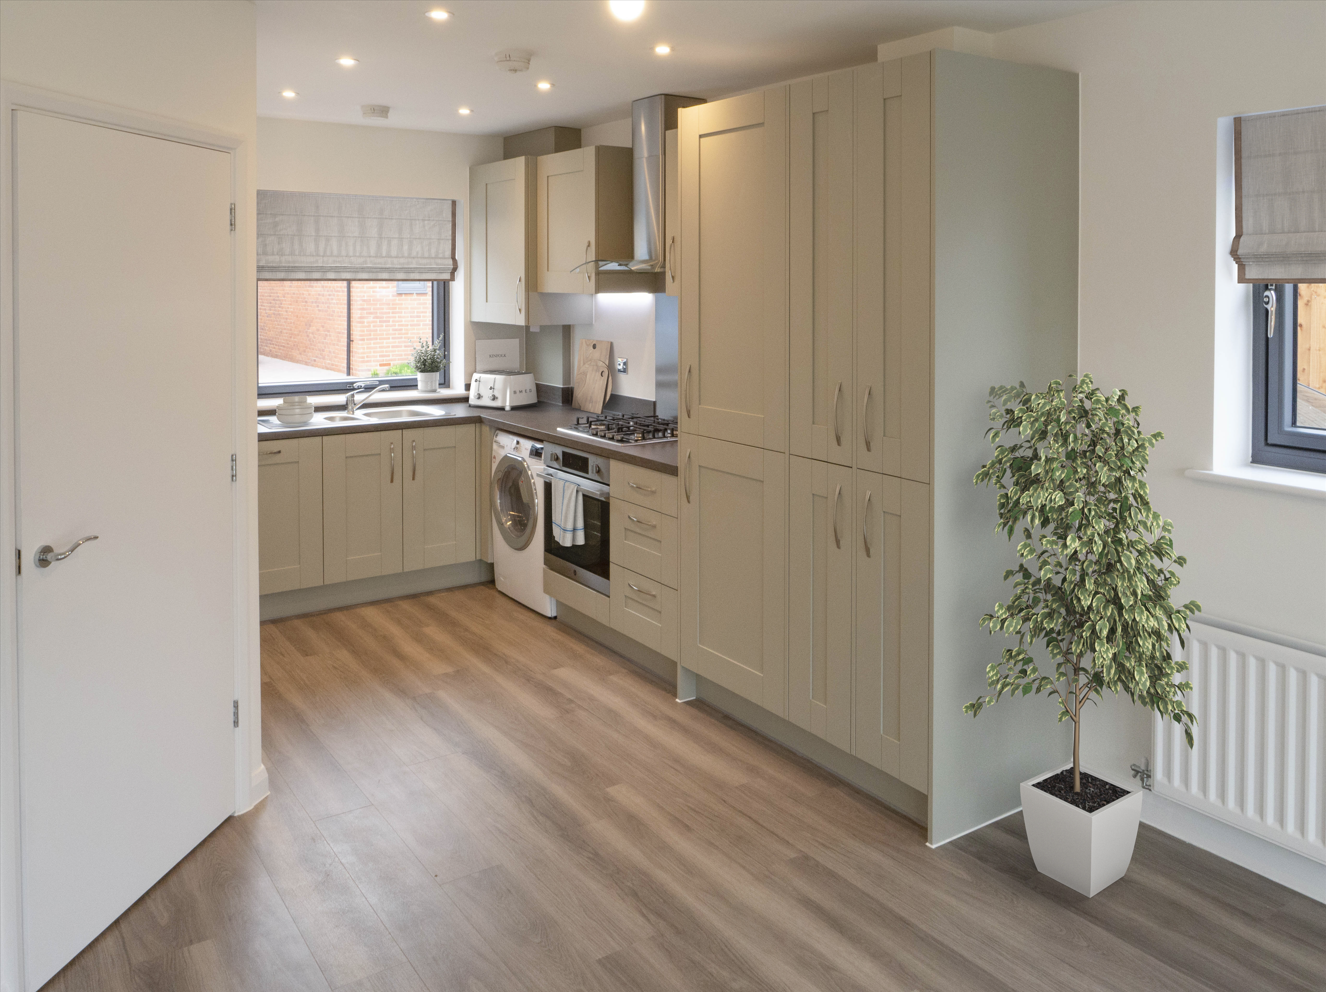 Image of kitchen in Plot 3 Carter Meadows